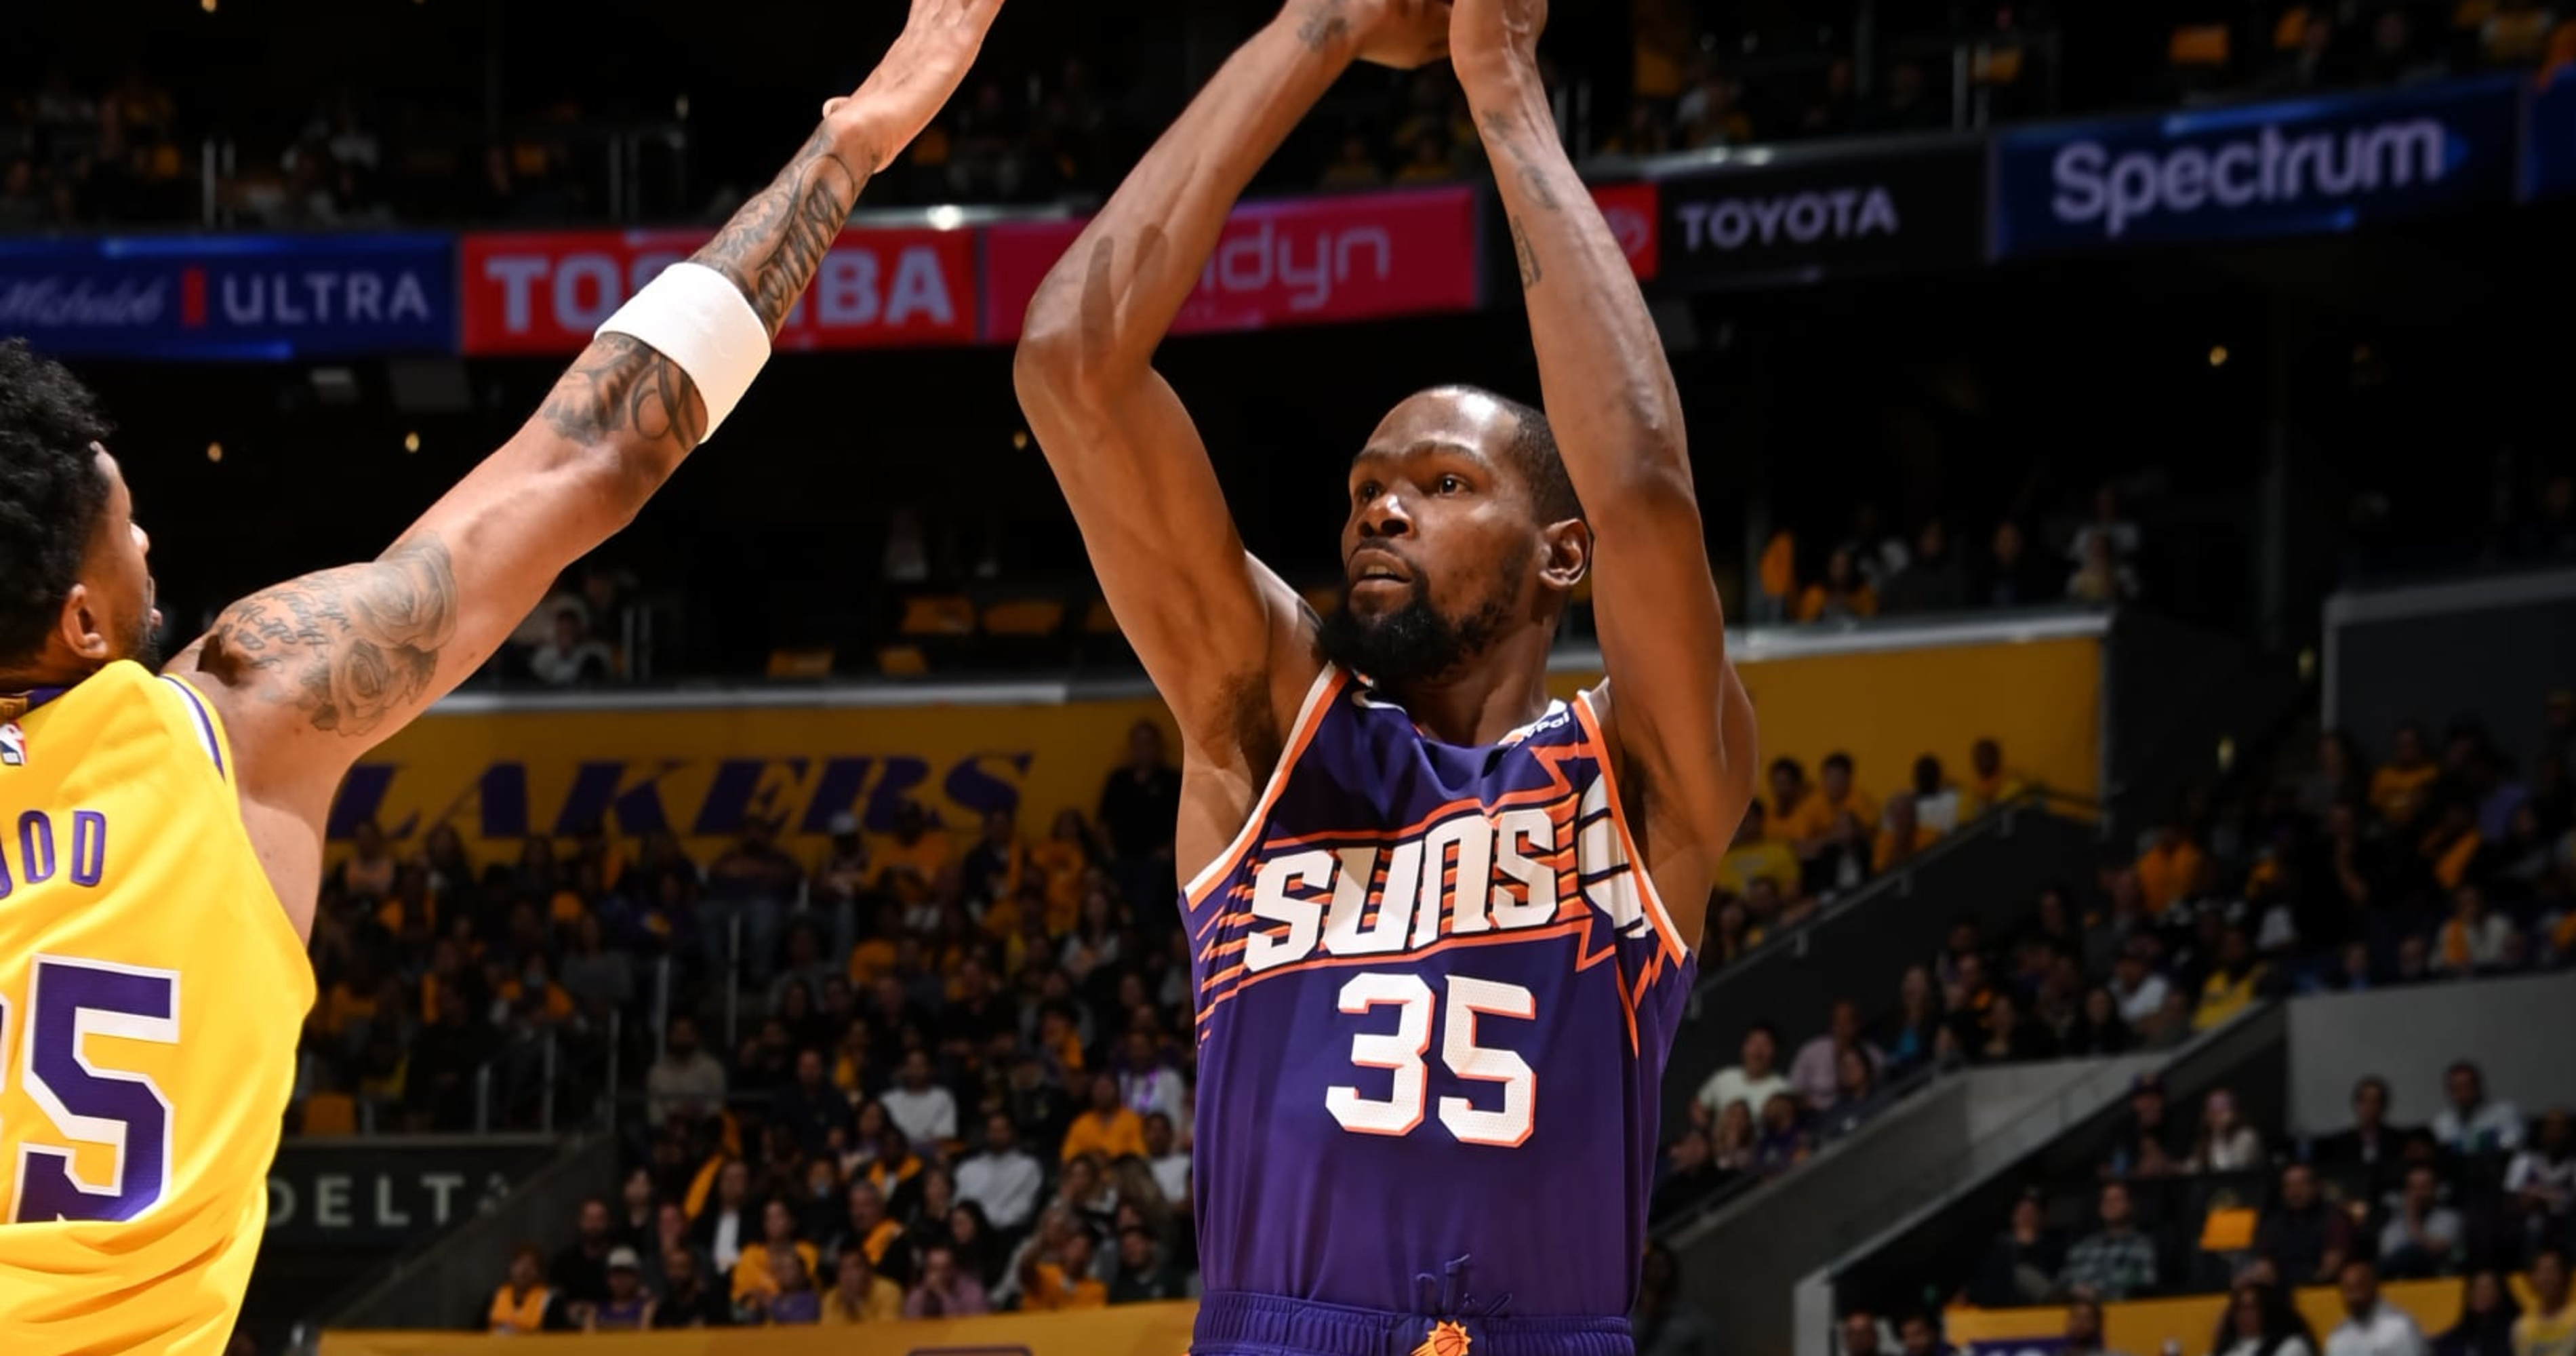 Kevin Durant Wows NBA Fans Despite Suns Loss vs. LeBron, Lakers Without Booker, Beal